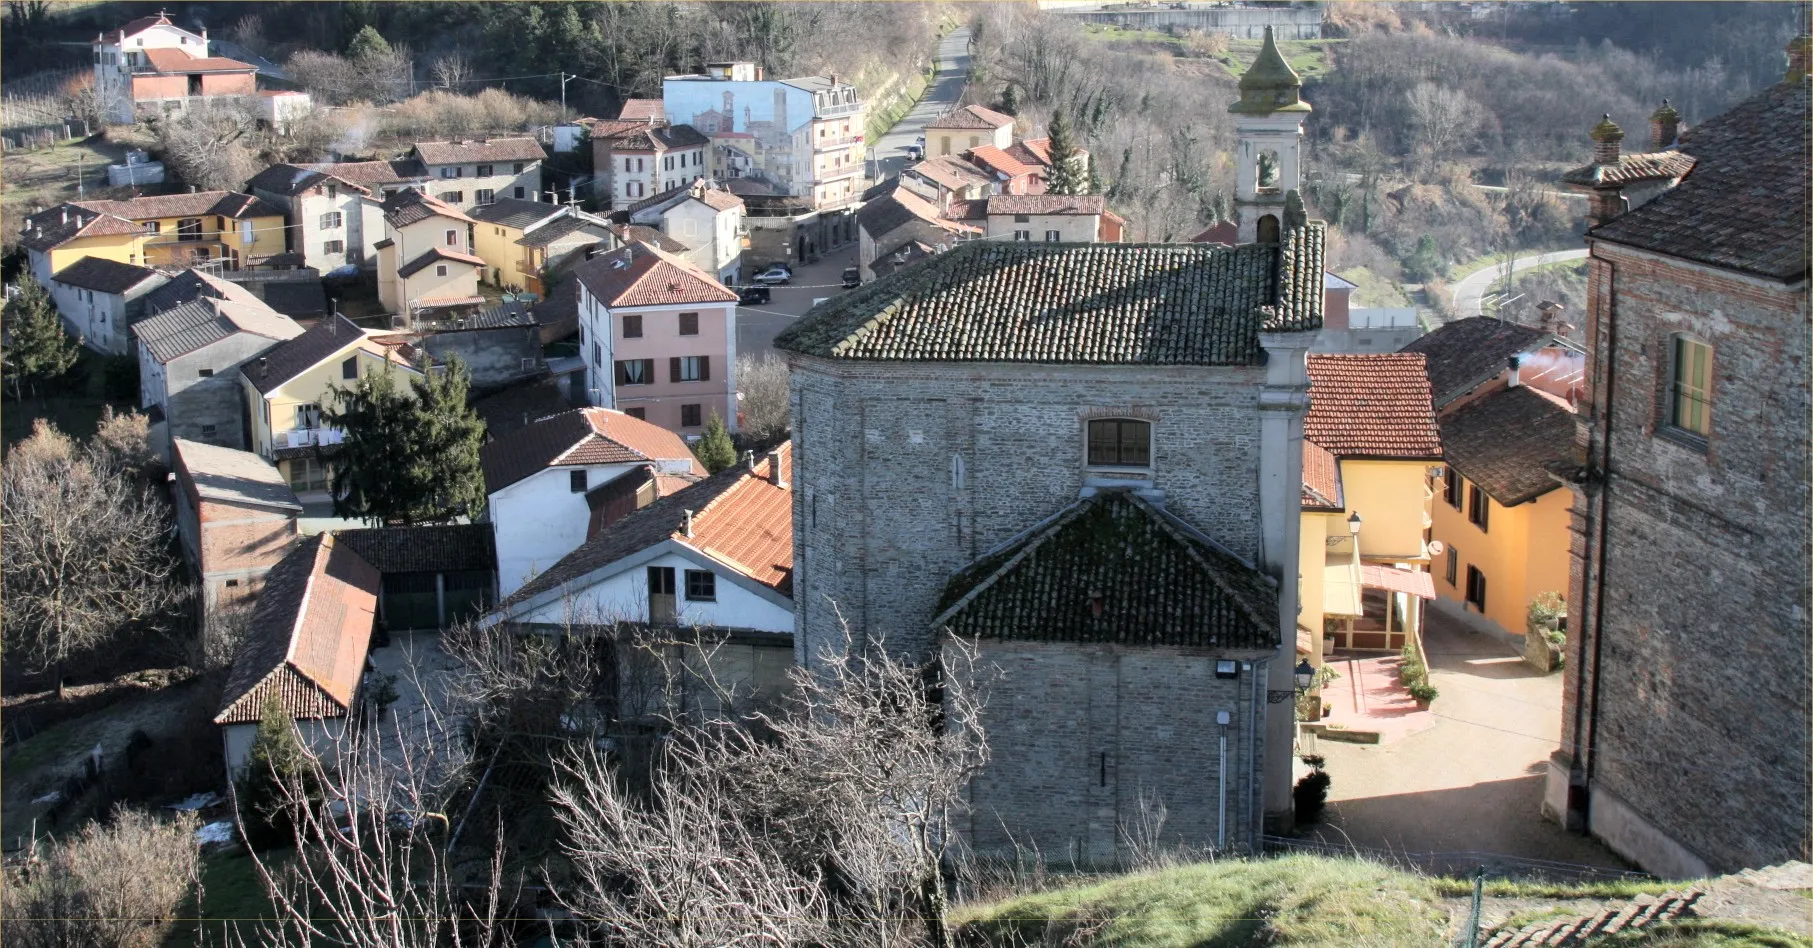 Photo showing: The village from the watchtower at its center - a prominent local landmark.